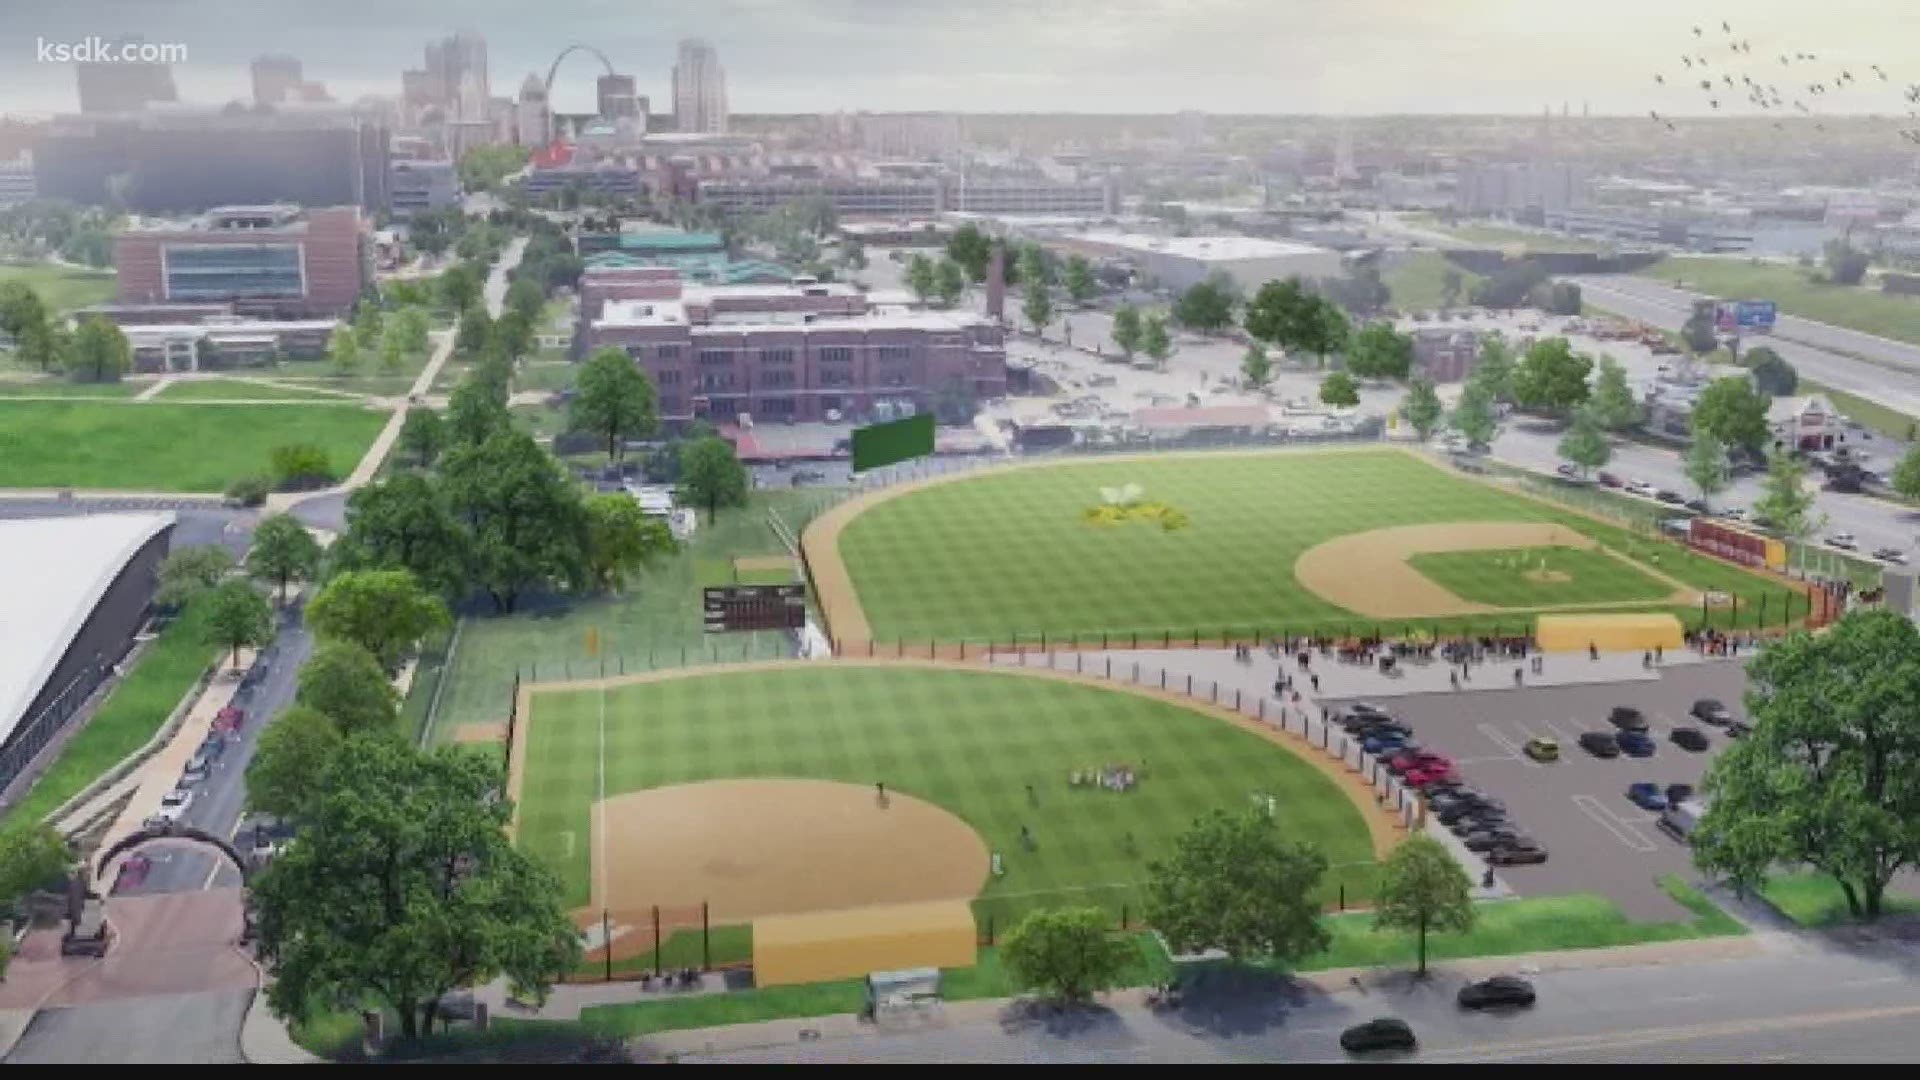 "This field is a monument to St. Louis. It's a historical site."